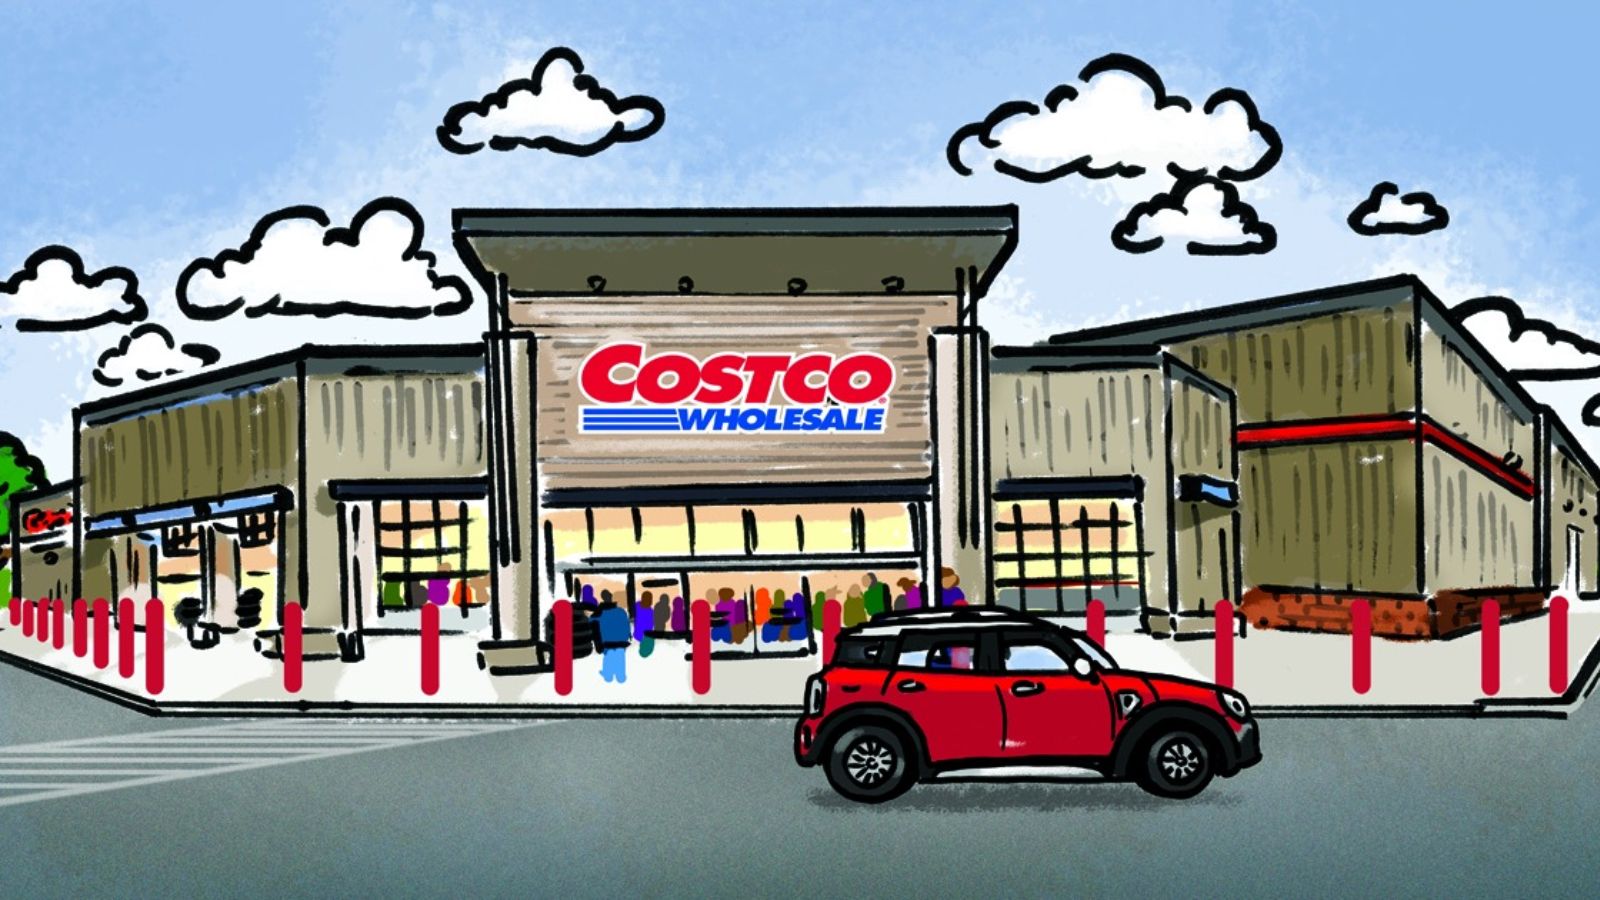 (EXPIRED) Costco Get 75 in Costco Cash by purchasing 500+ online